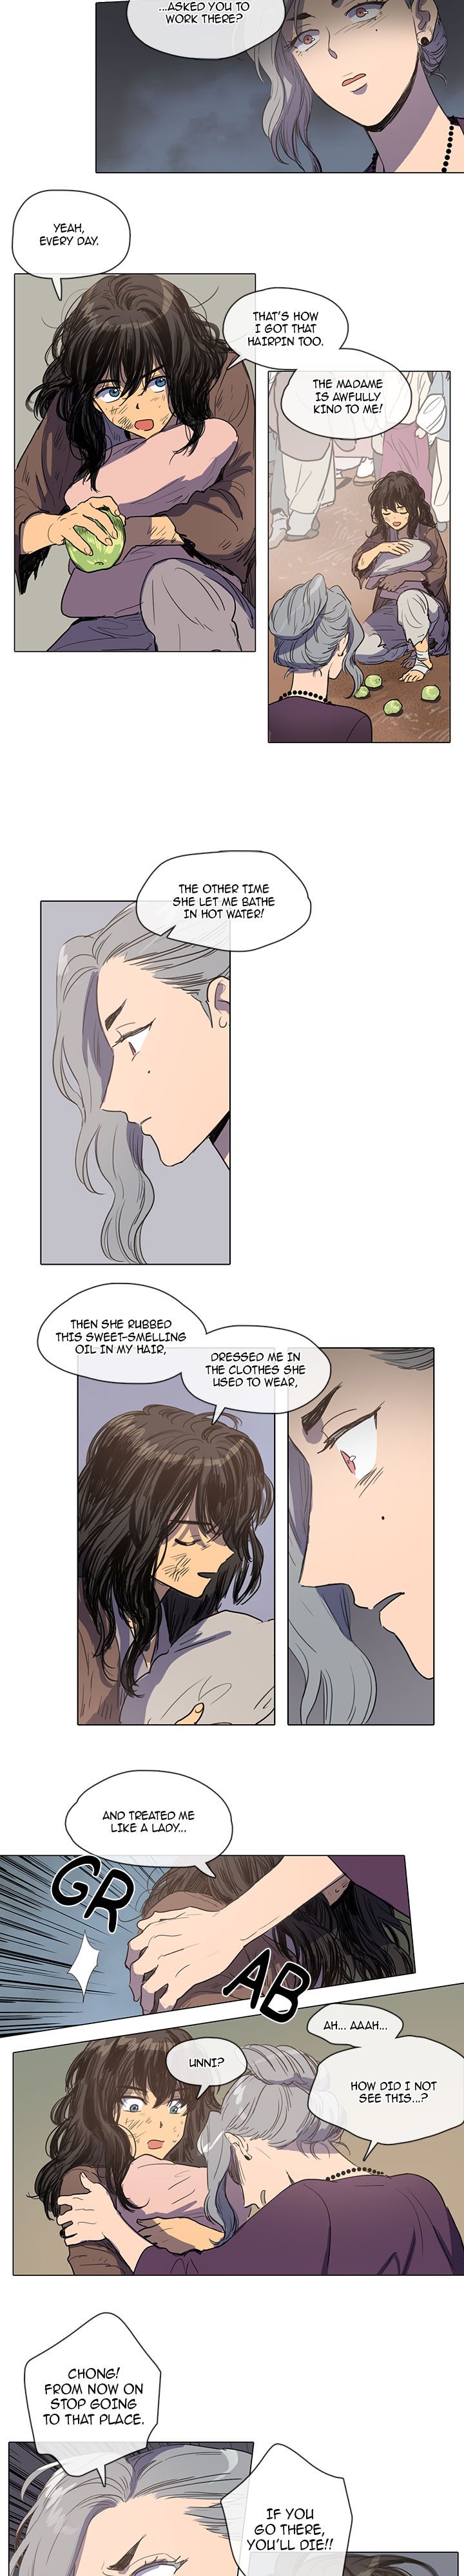 Her Tale of Shim Chong Ch.14